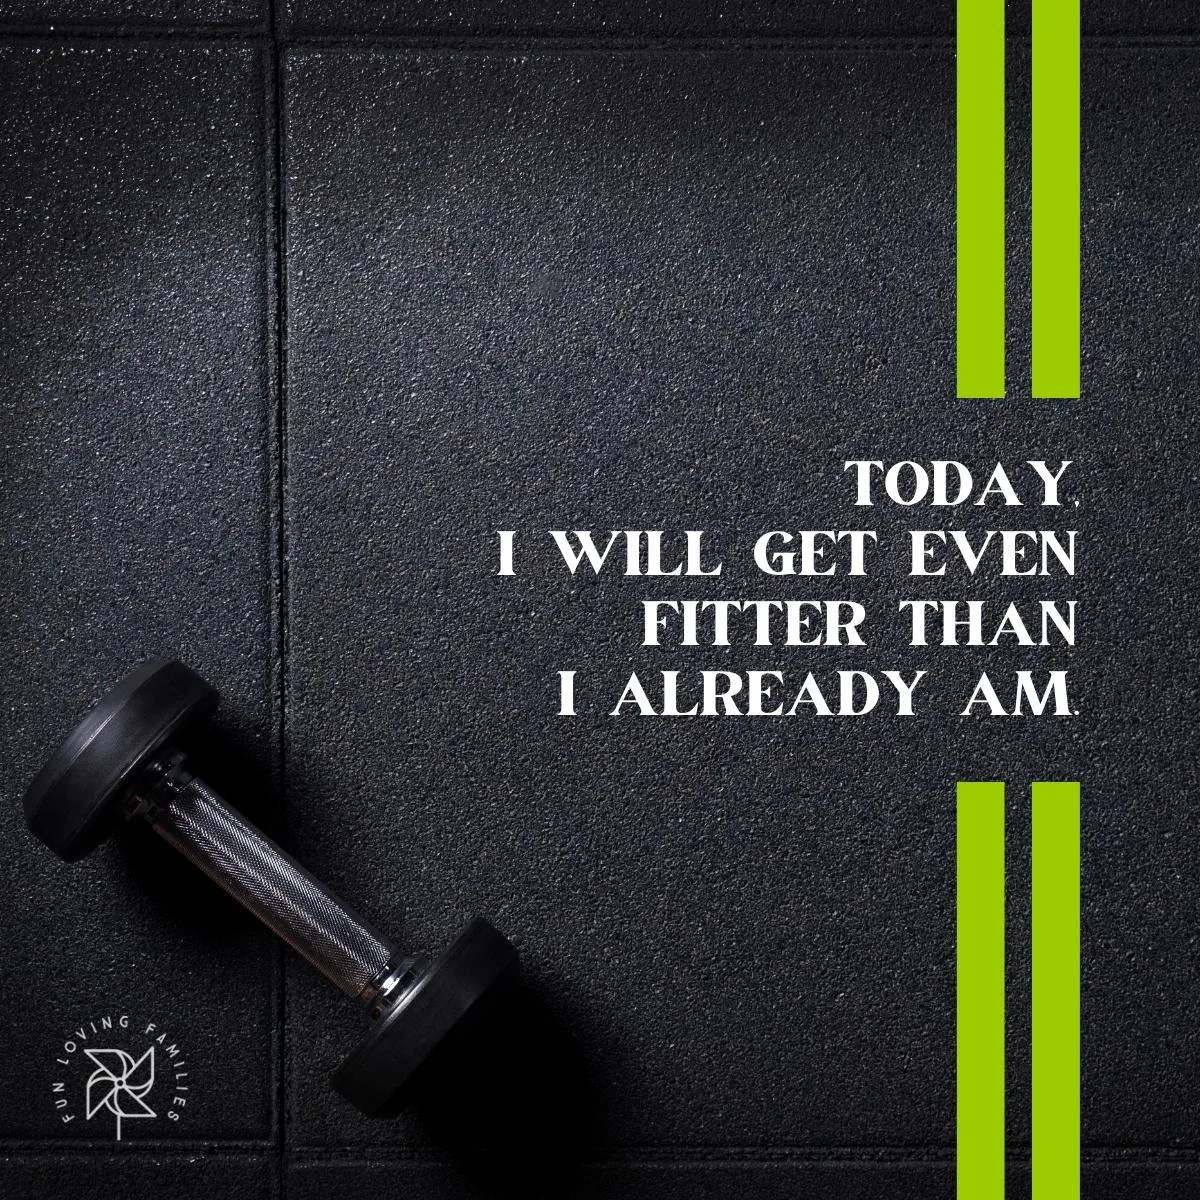 Today, I will get even fitter than I already am affirmation